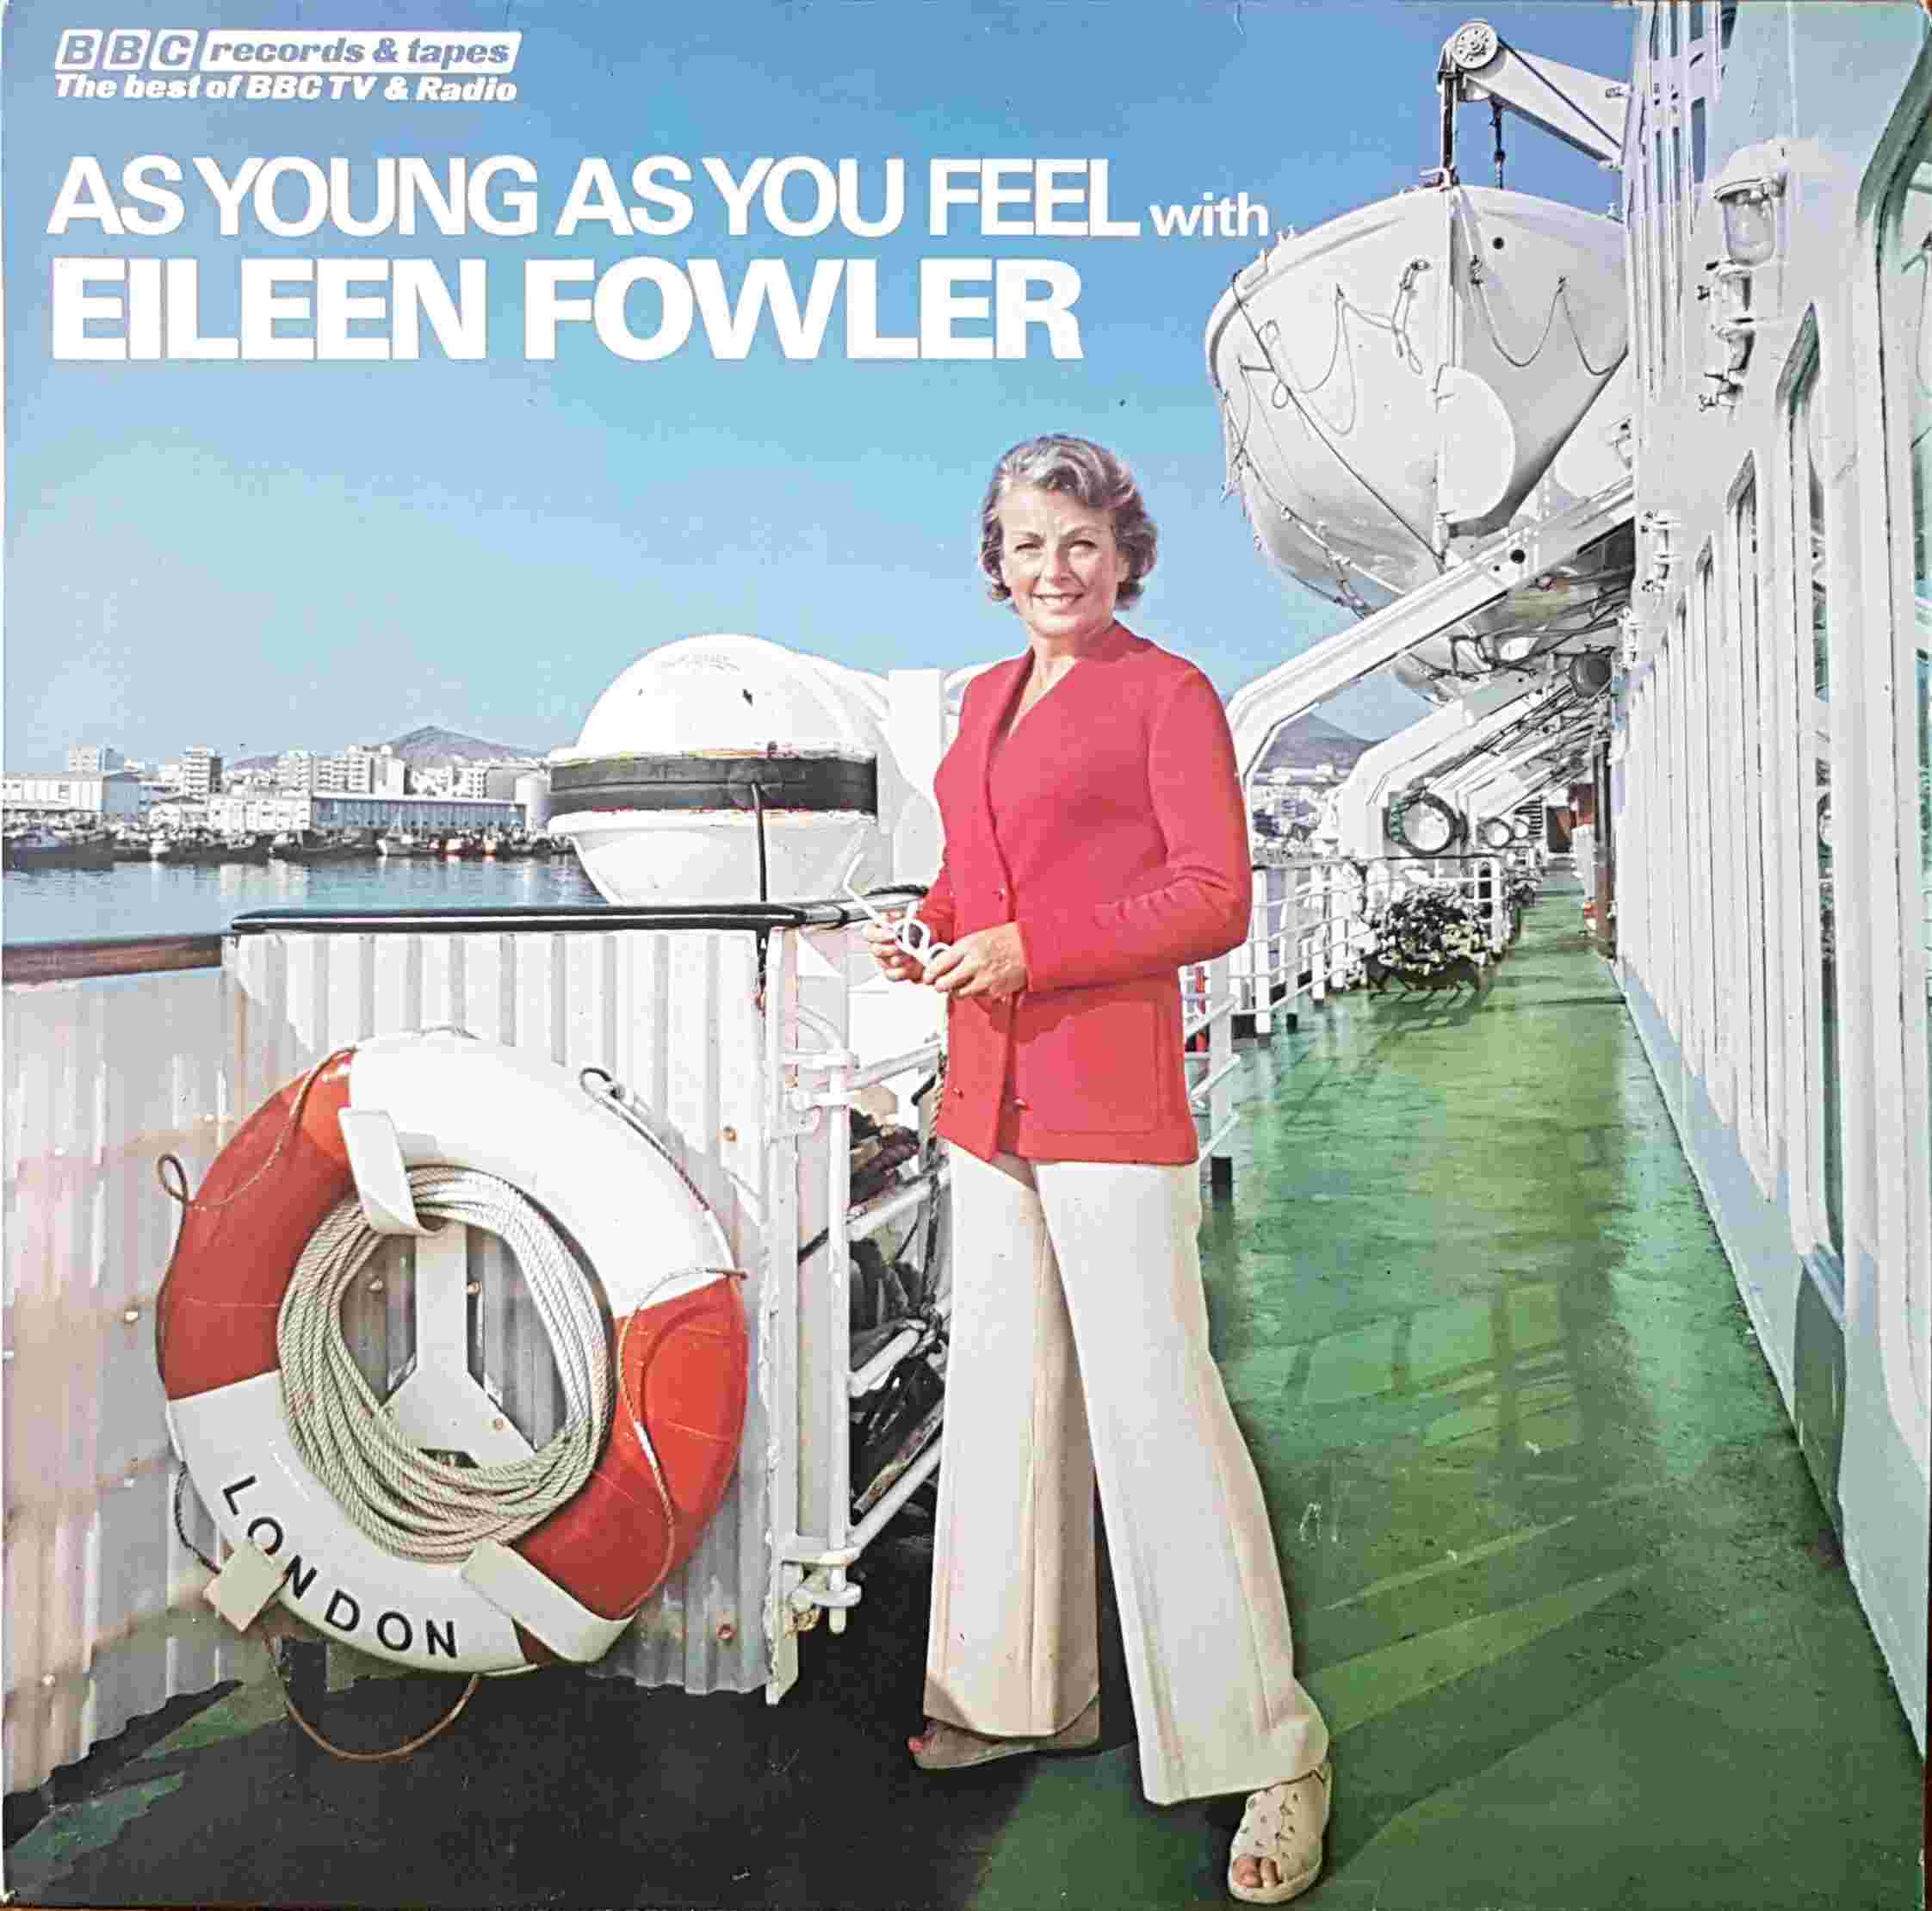 Picture of REC 195 As young as you feel by artist Eileen Fowler from the BBC albums - Records and Tapes library